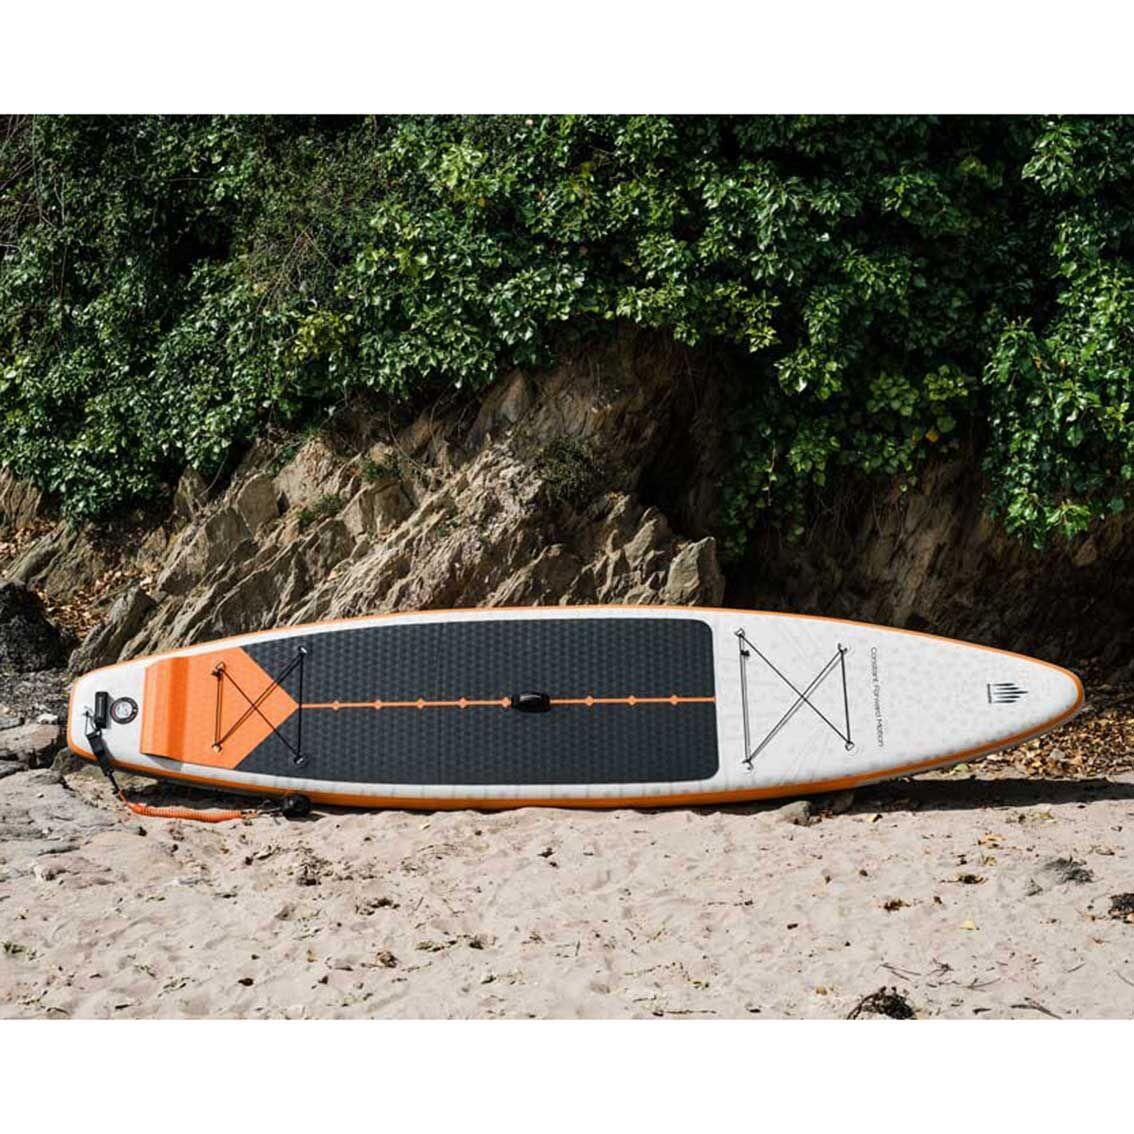 SHARK TOURING 12'6 x 32" x 6" FOR RIDERS WANTING GLIDE AND STABILTY 3/4